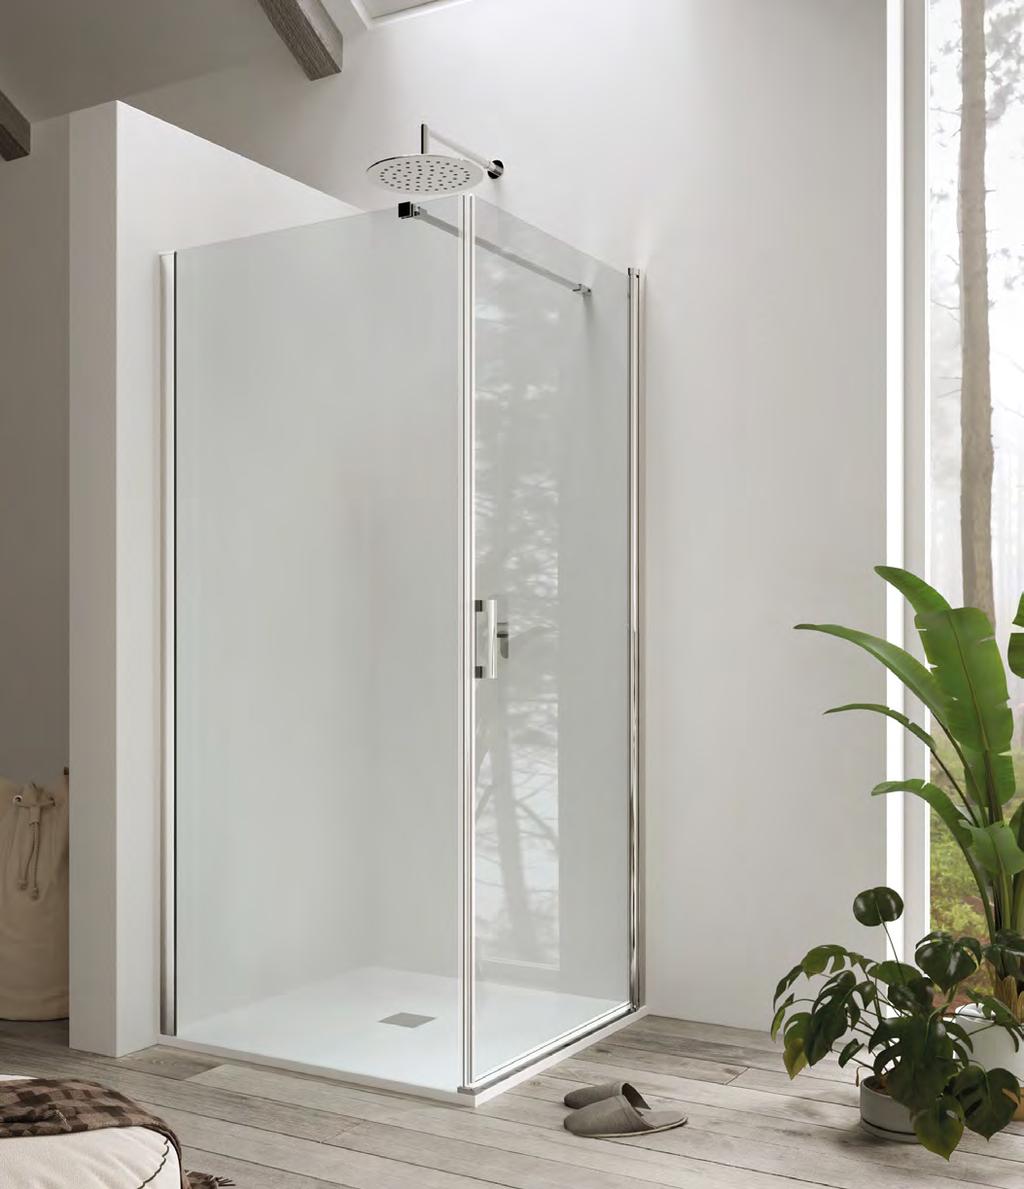 Weiss-Stern Dimensione Box Weiss-Stern Hermes Hermes Parete fissa Trasparente Fixed door Clear glass Parete fissa Fixed glass Trasparente Clear glass Make your choice HERMES Caratteristiche e